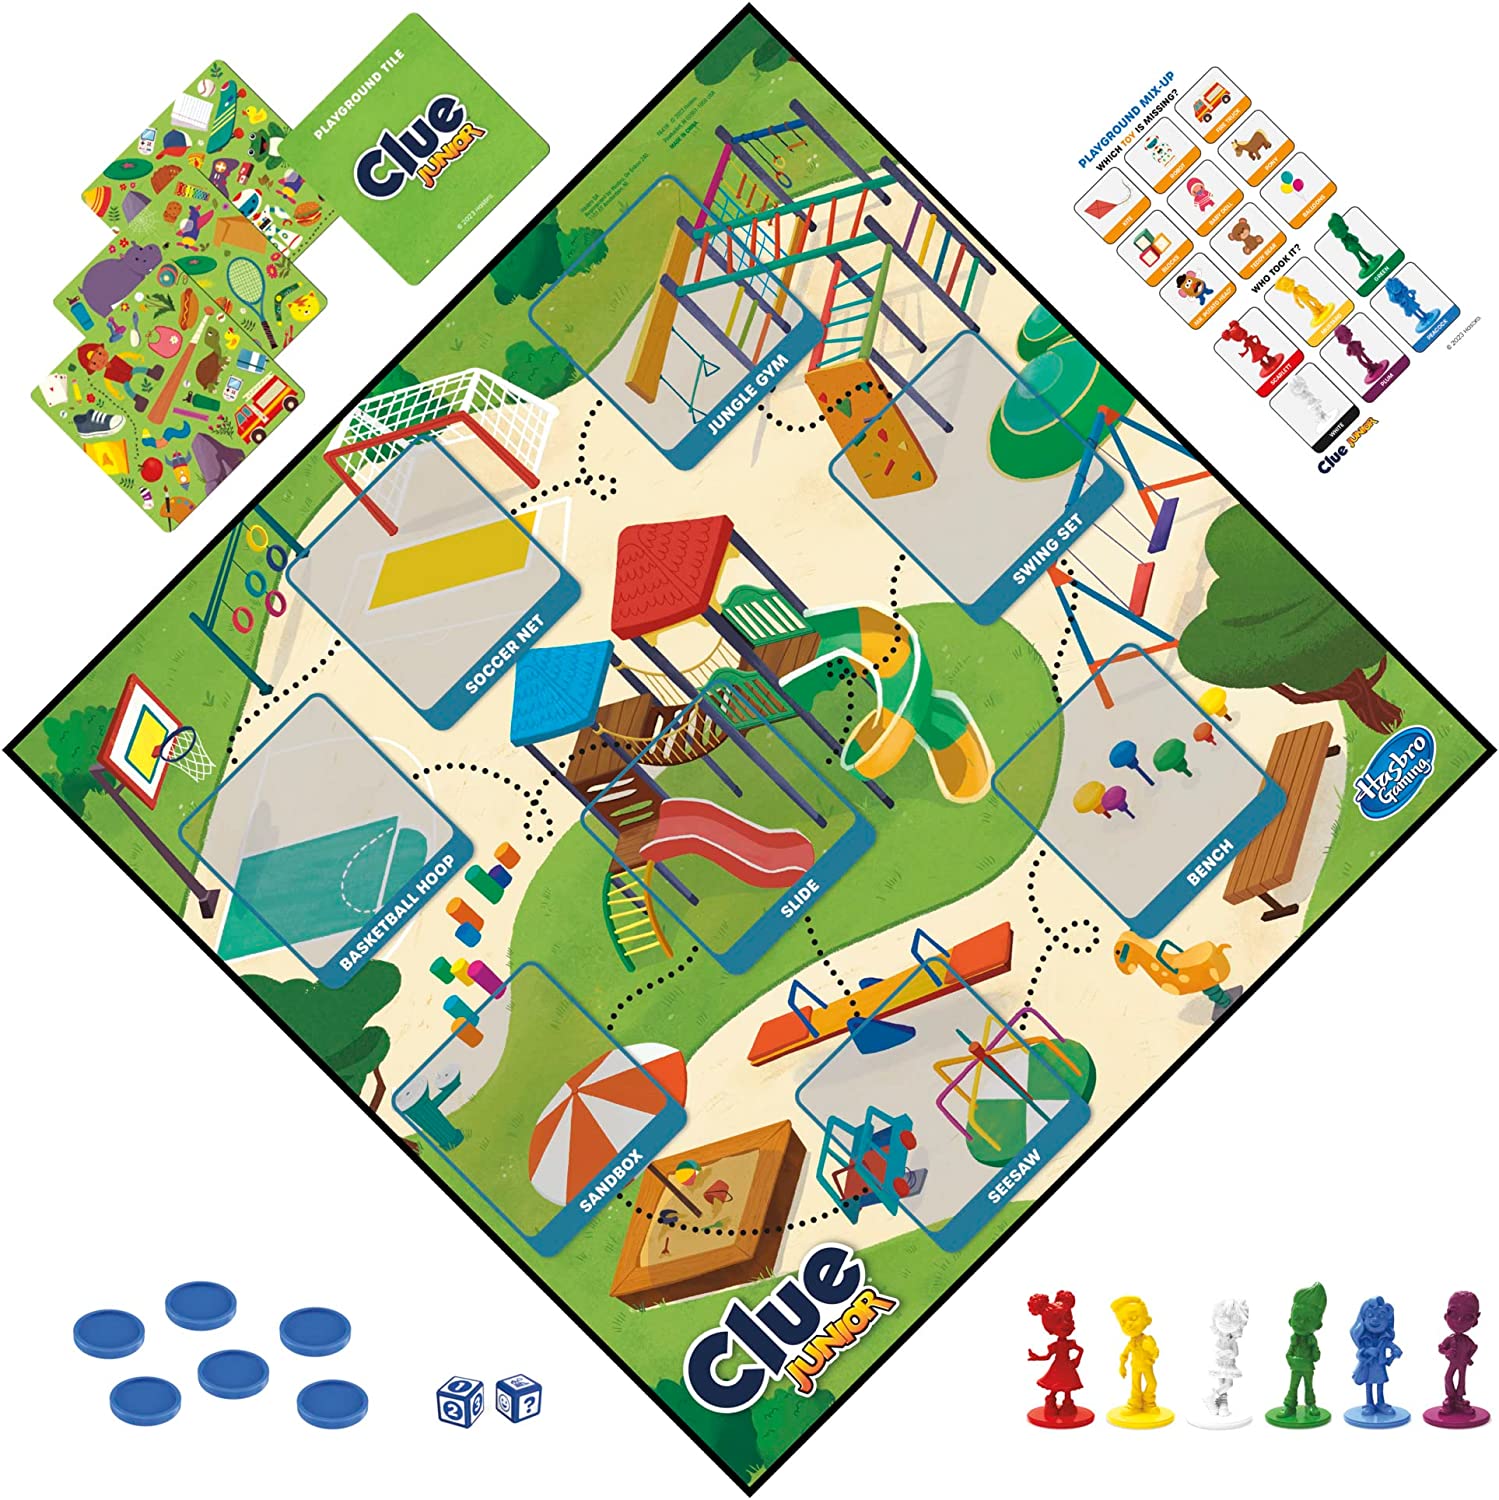 Clue Junior Game, 2-Sided Gameboard, 2 Games in 1 – ONYT